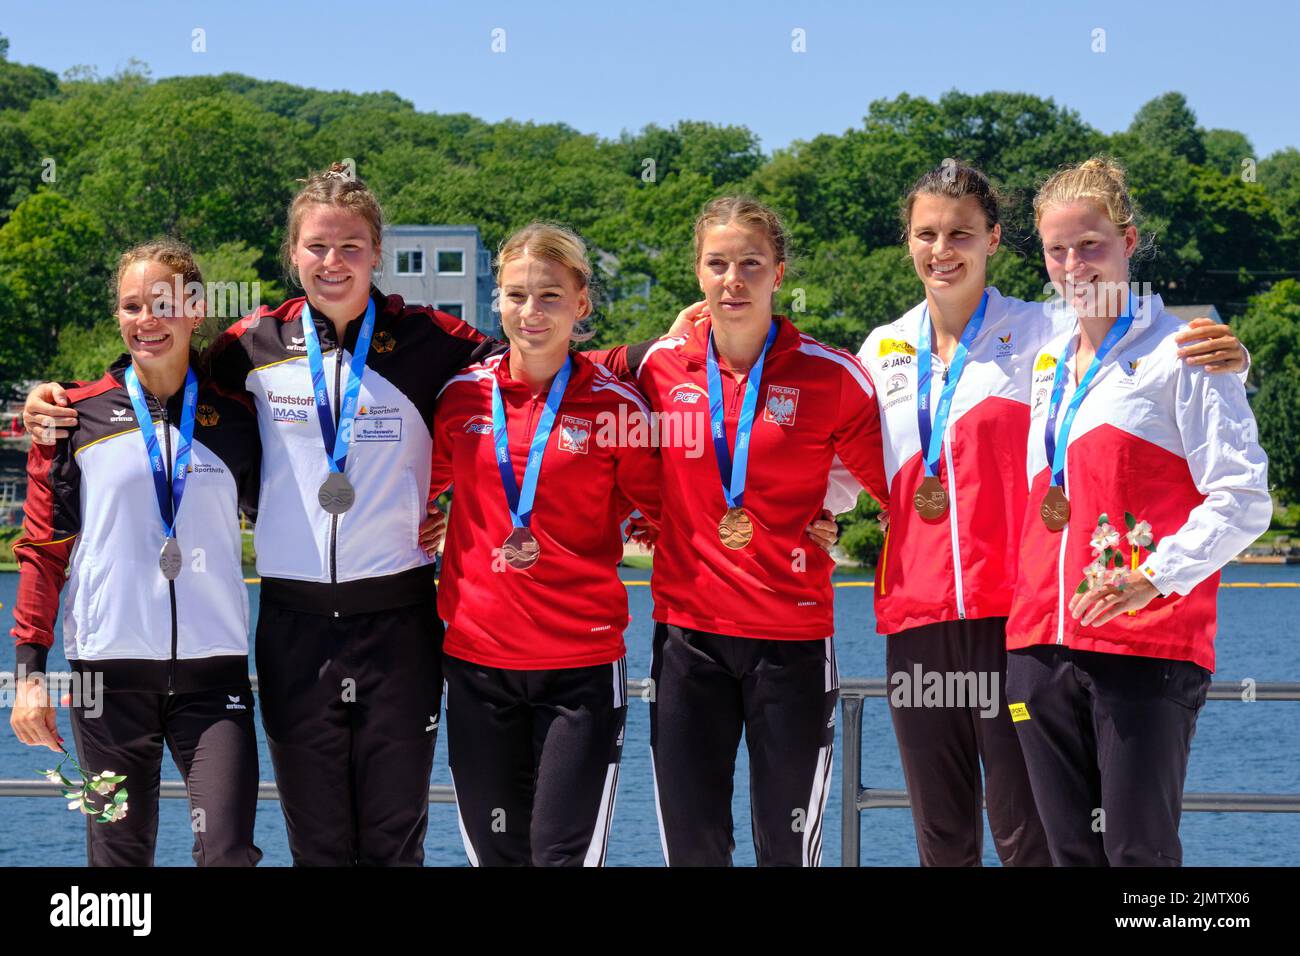 Dartmouth, Canada. August 7th, 2022. Women K2 500m World Championship Podium, Champion Karolina Naja and Anna Pulawska from Poland take Gold, Paulina Paske and Jule Hake from Germany take Silver, and Hemrmien Peters and Lise Broekx from Belgium taking the Bronze. The 2022 ICF Canoe Sprint and Paracanoe World Championships takes place on Lake Banook in Dartmouth (Halifax). Credit: meanderingemu/Alamy Live News Stock Photo